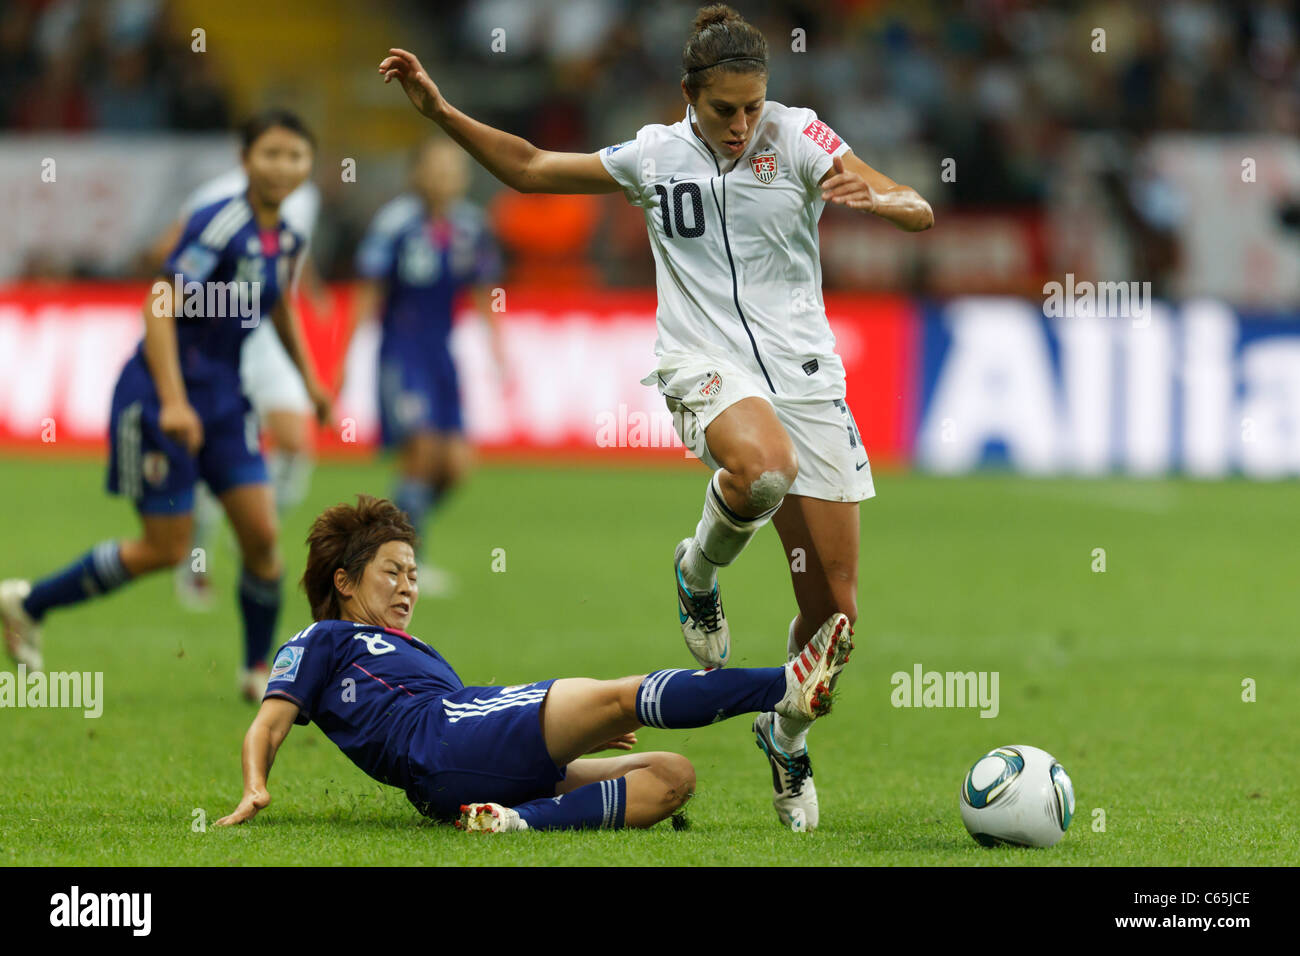 Carli Lloyd of the United States (r) avoids a tackle by Aya Miyama of Japan (l) during the 2011 FIFA Women's World Cup final. Stock Photo